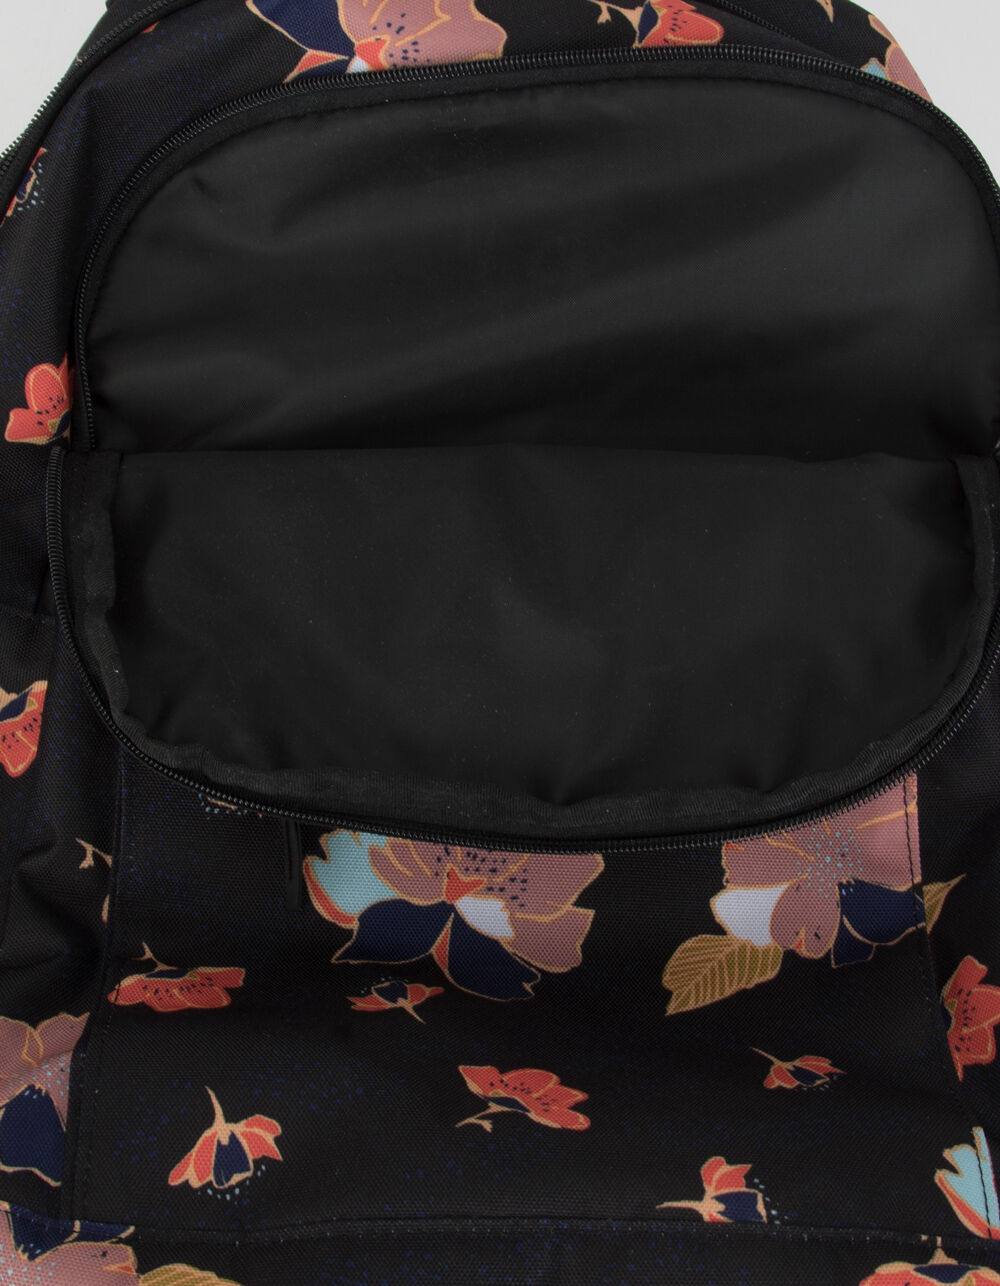 ROXY Here You Are Floral Backpack - BLKCO - SMUFLORALHERE